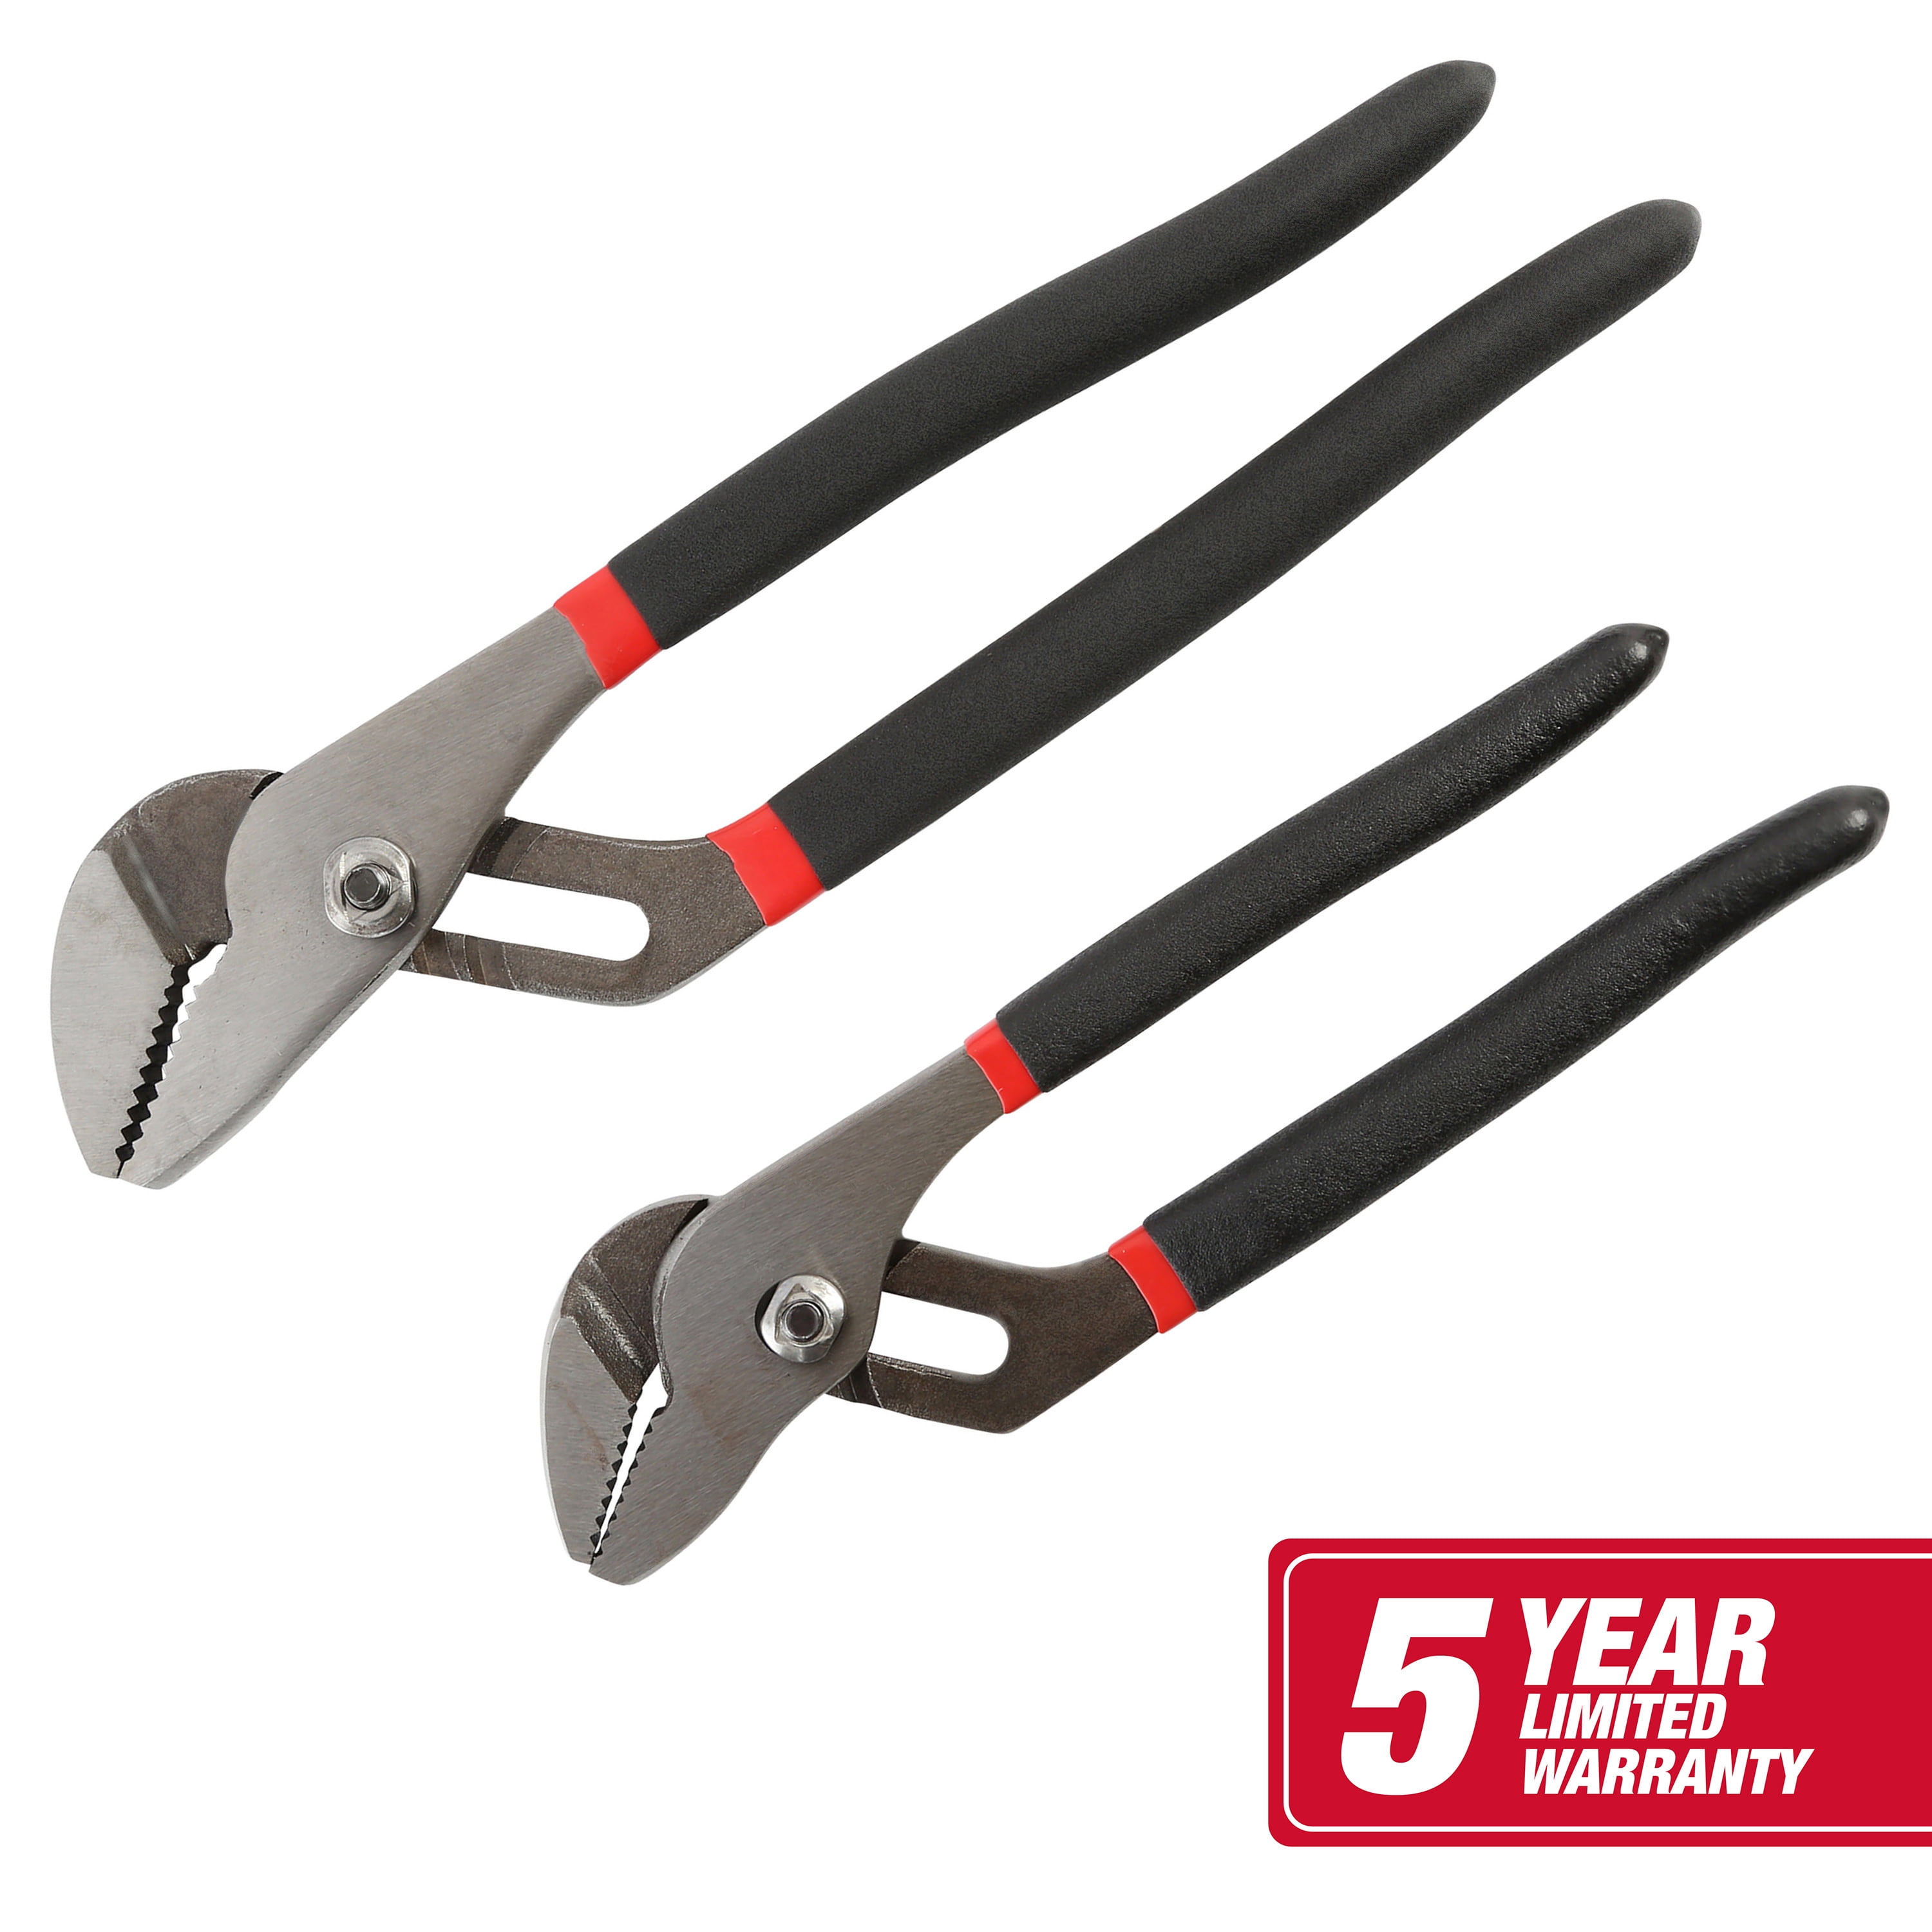 Bulb Pliers Tool for Removing Miniature Mini Bulbs New Release